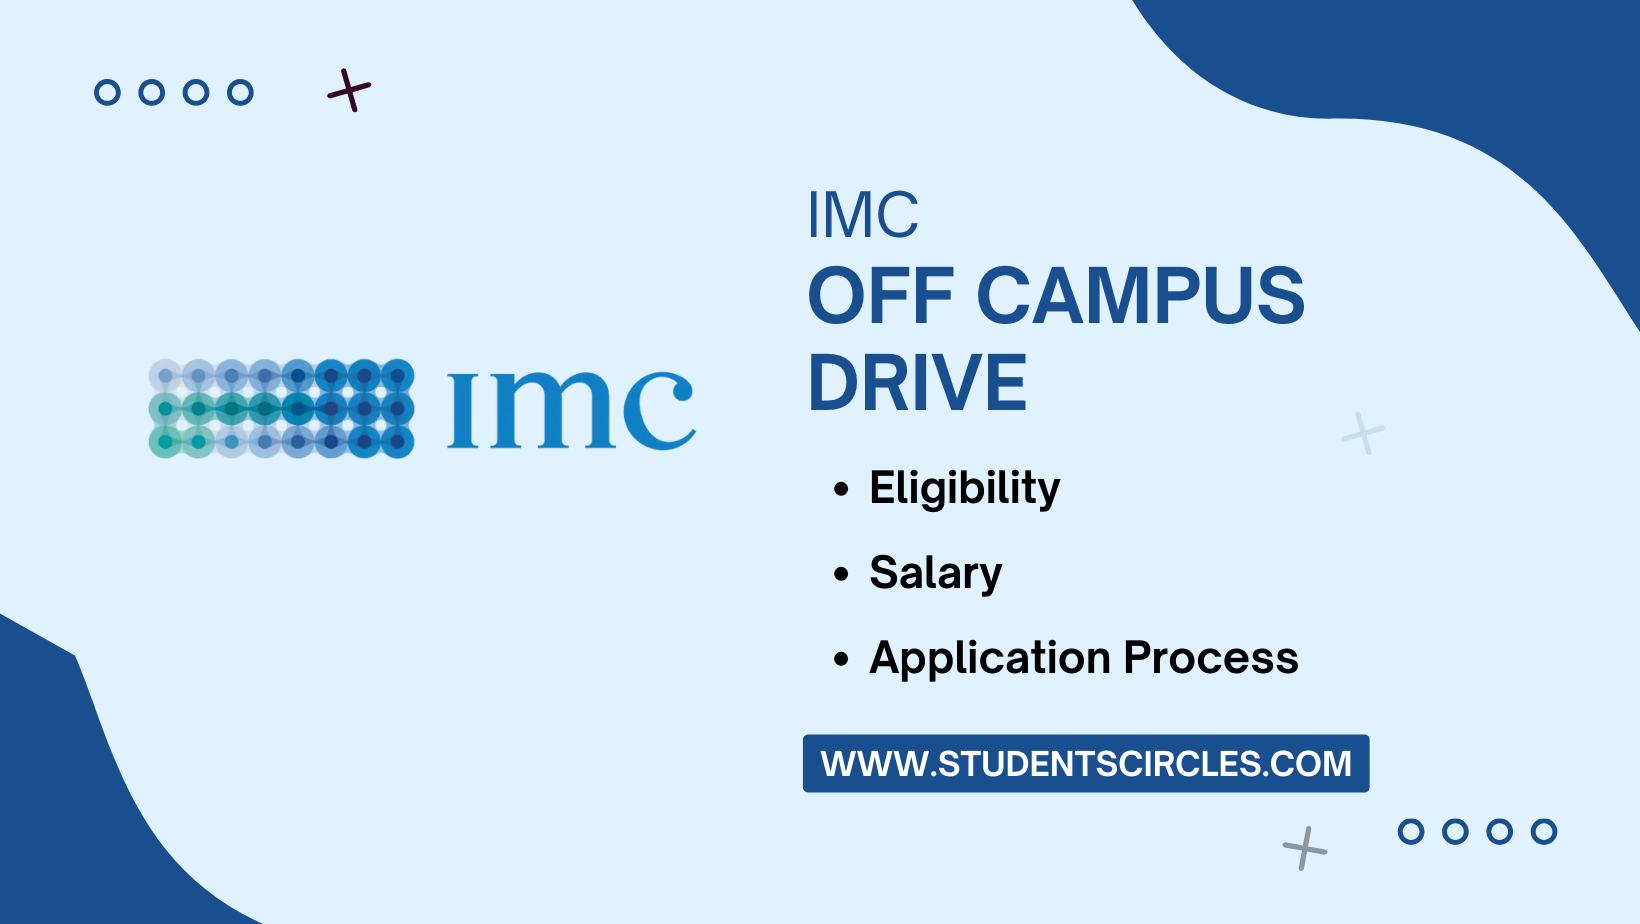 IMC Trading Off Campus Drive